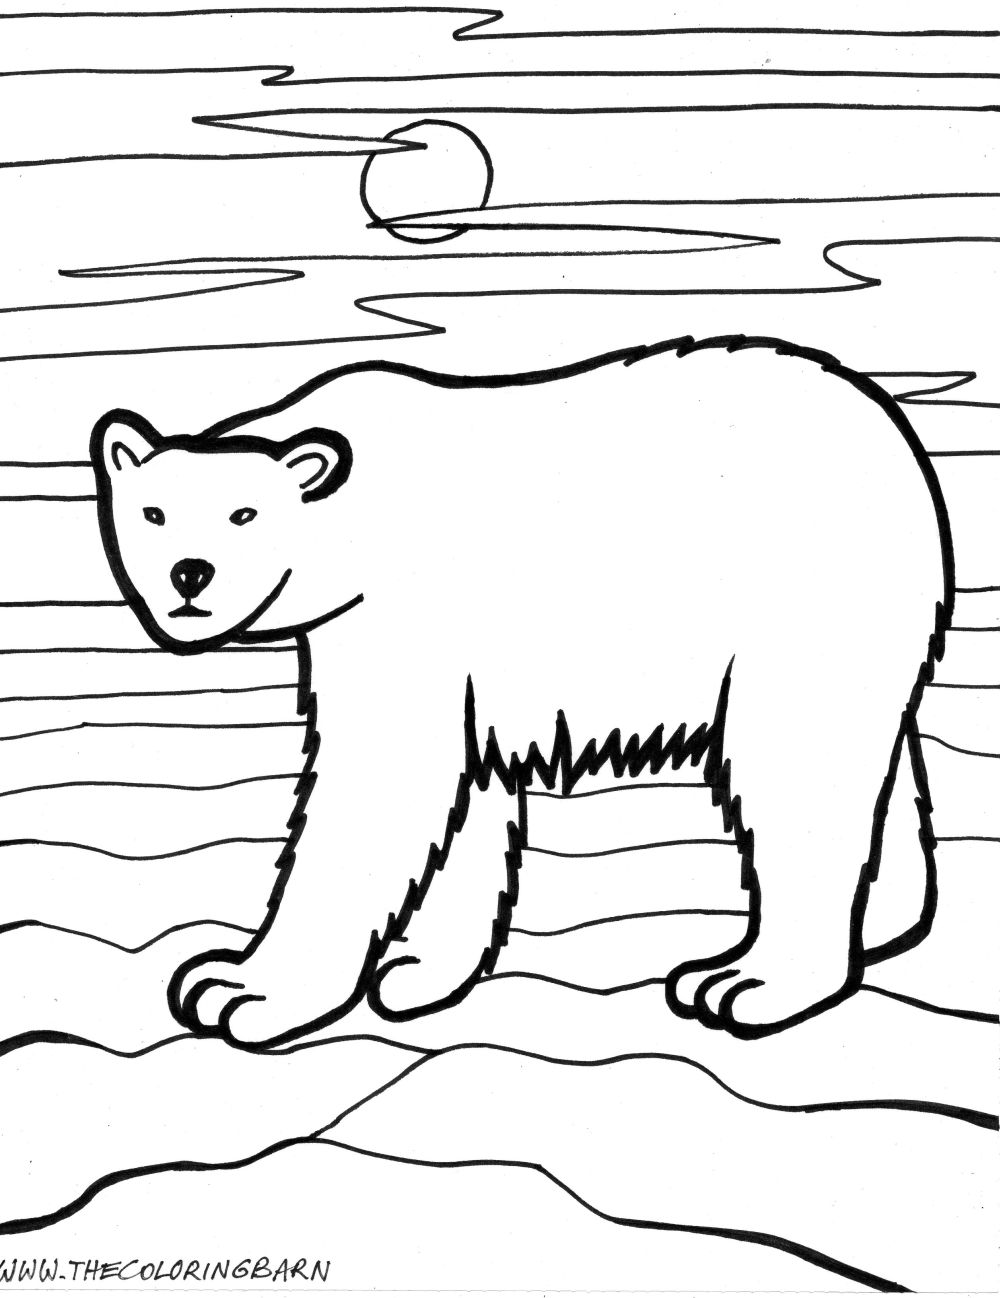 Free Coloring Page Of Arctic Animals Quality Coloring Page - Coloring Home